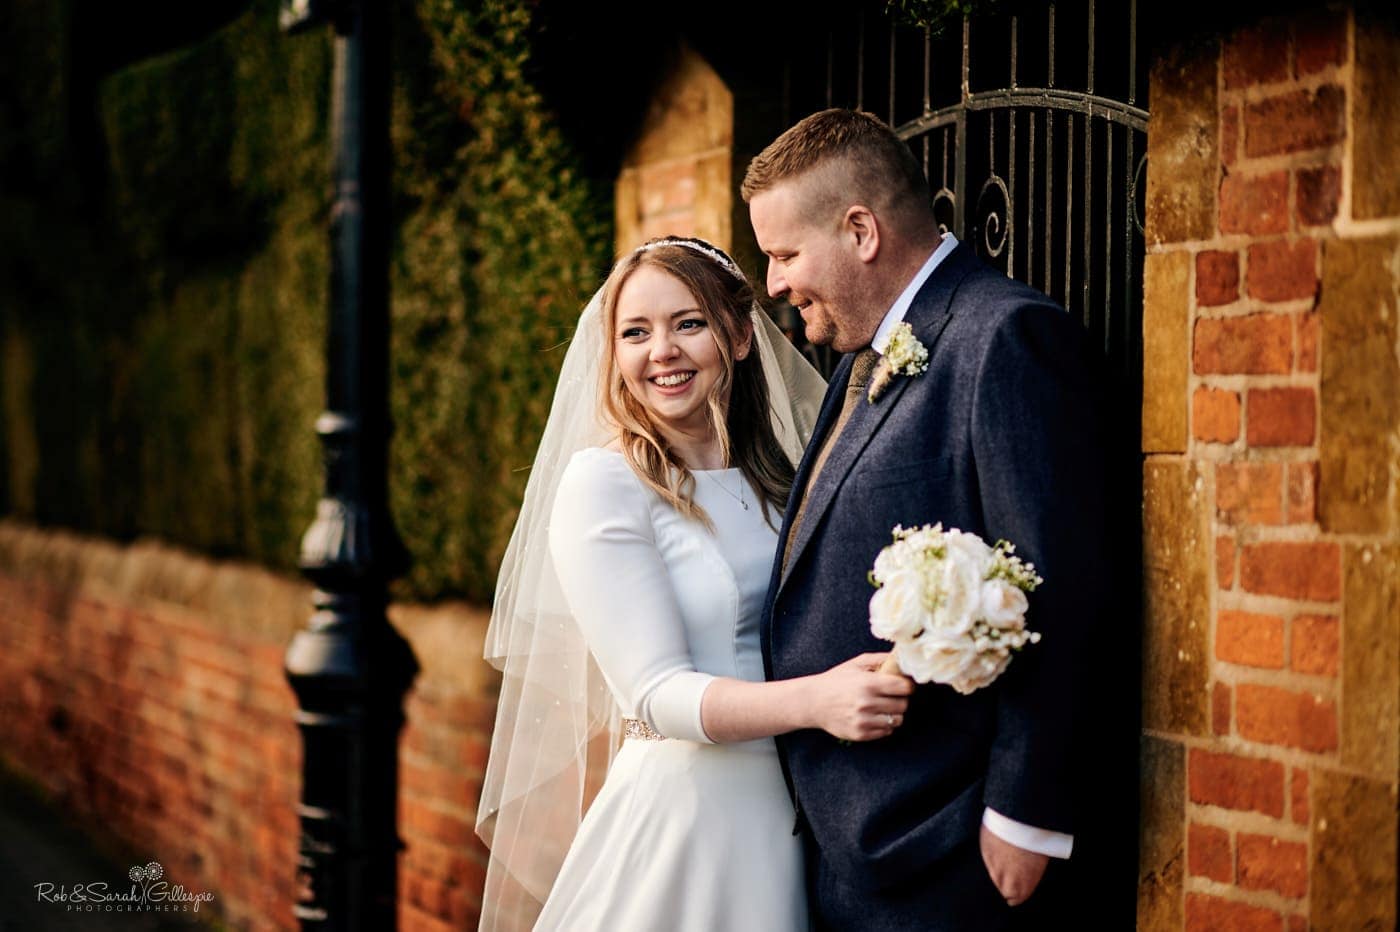 Bride and groom relaxed and happy after small wedding in Stratford upon Avon